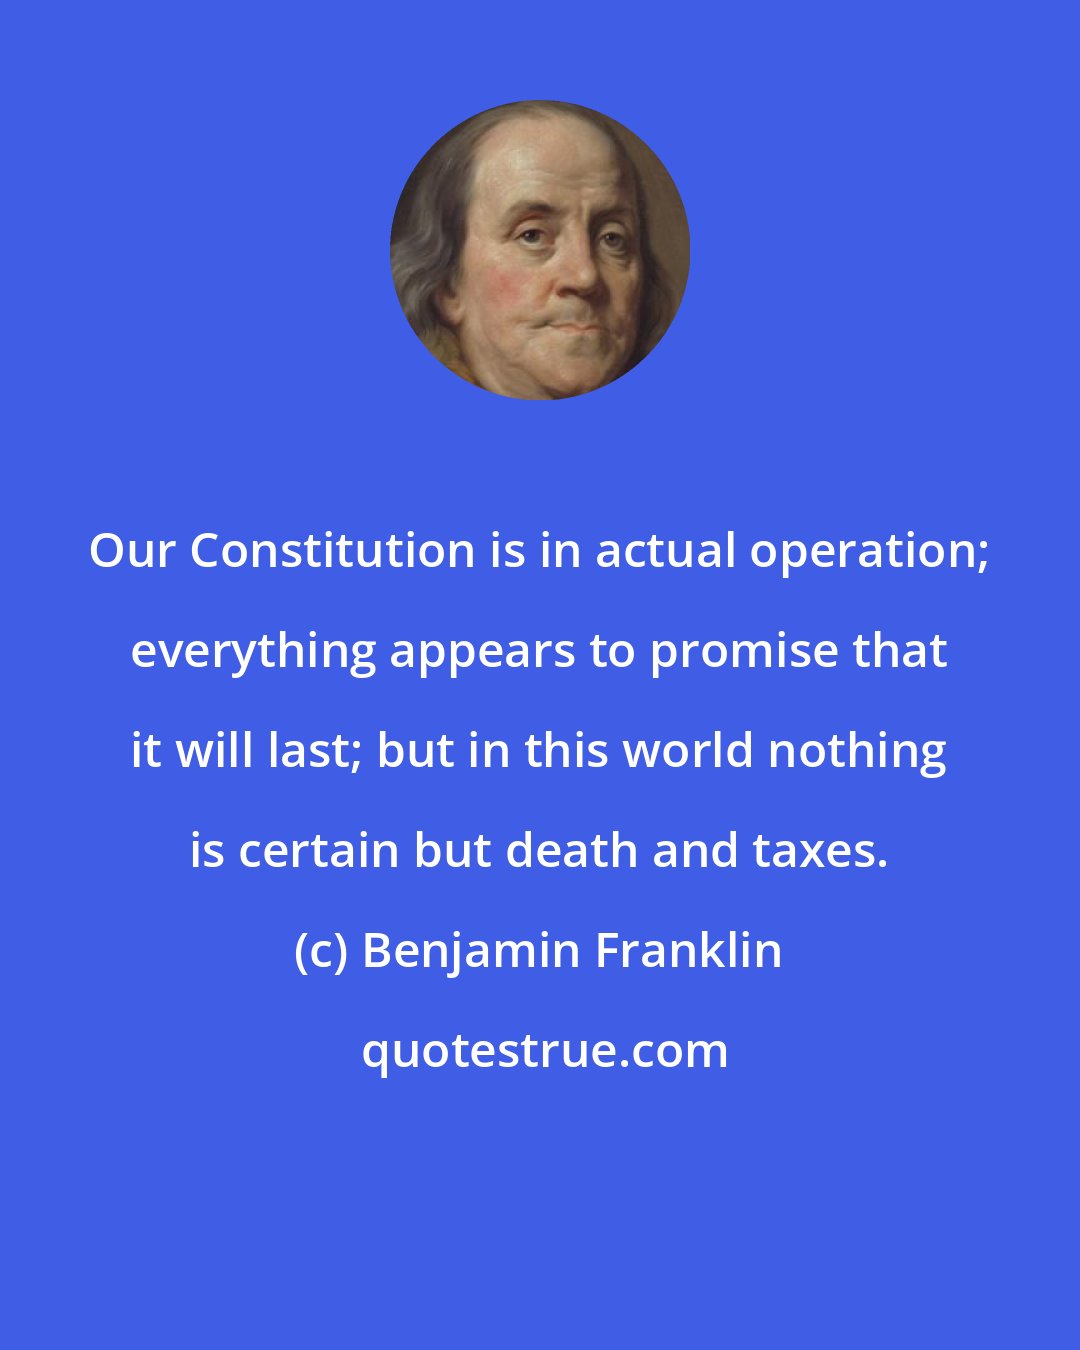 Benjamin Franklin: Our Constitution is in actual operation; everything appears to promise that it will last; but in this world nothing is certain but death and taxes.